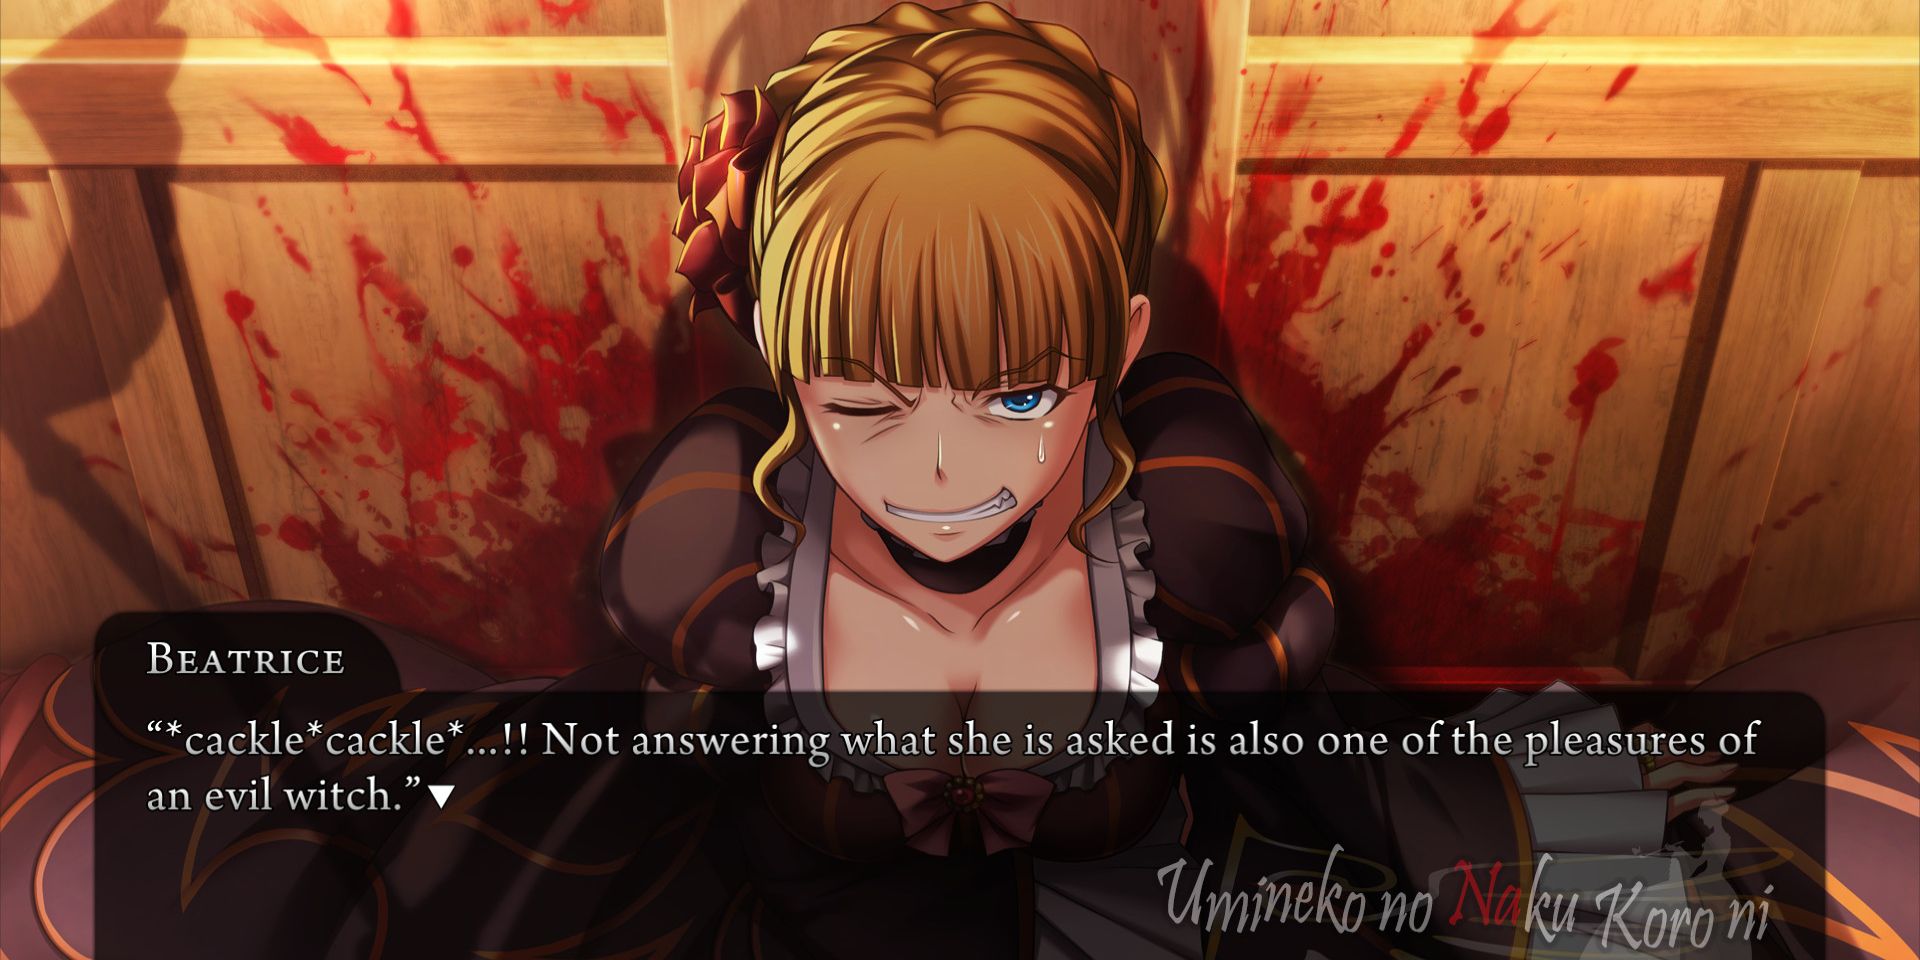 Beatrice talks to the viewer with a dialogue box beneath her in Umineko When They Cry.